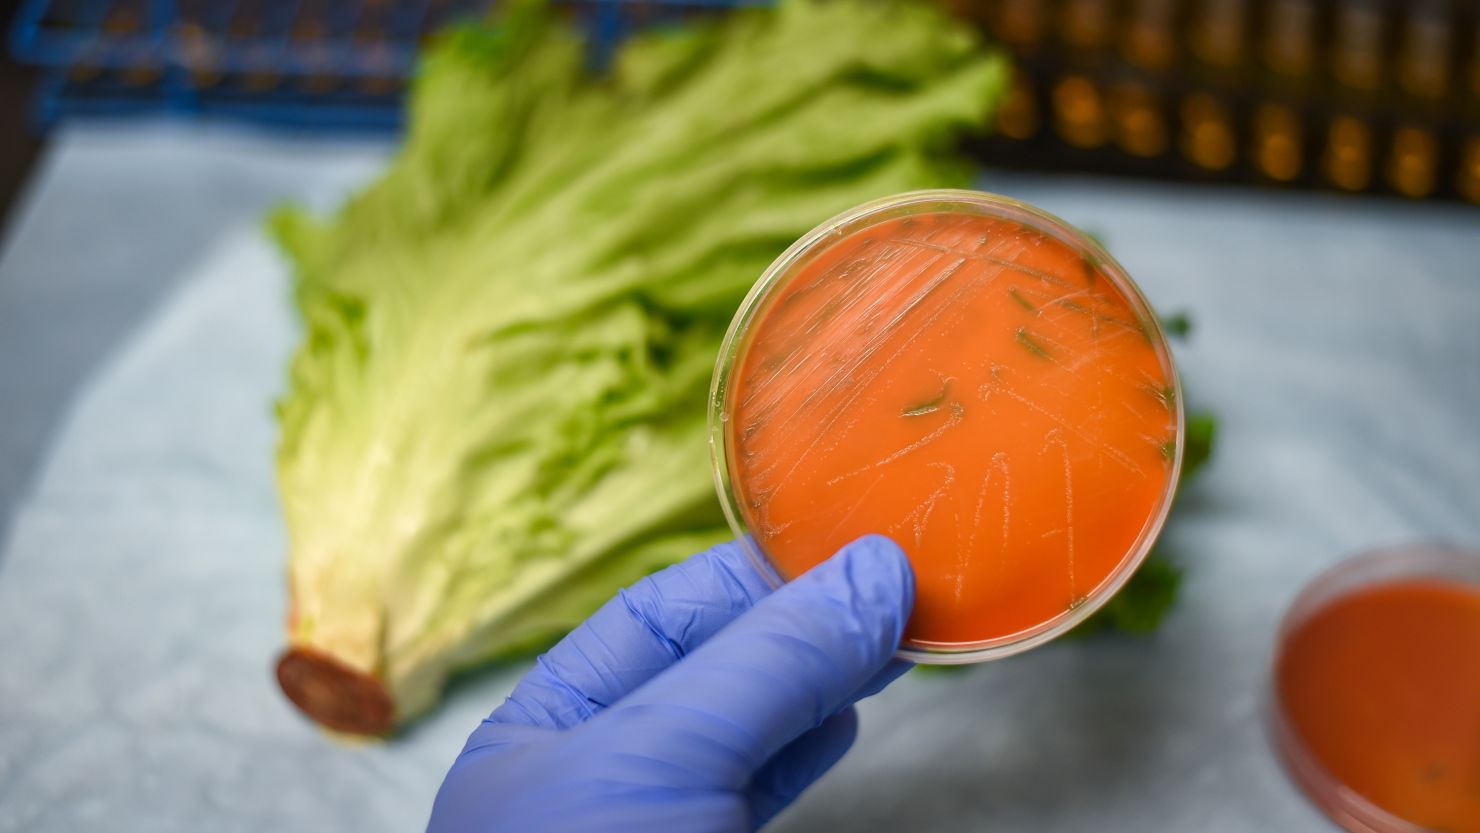 Deadly Listeria Outbreak in 10 States: What You Need to Know - Adela Journal - News from around the World